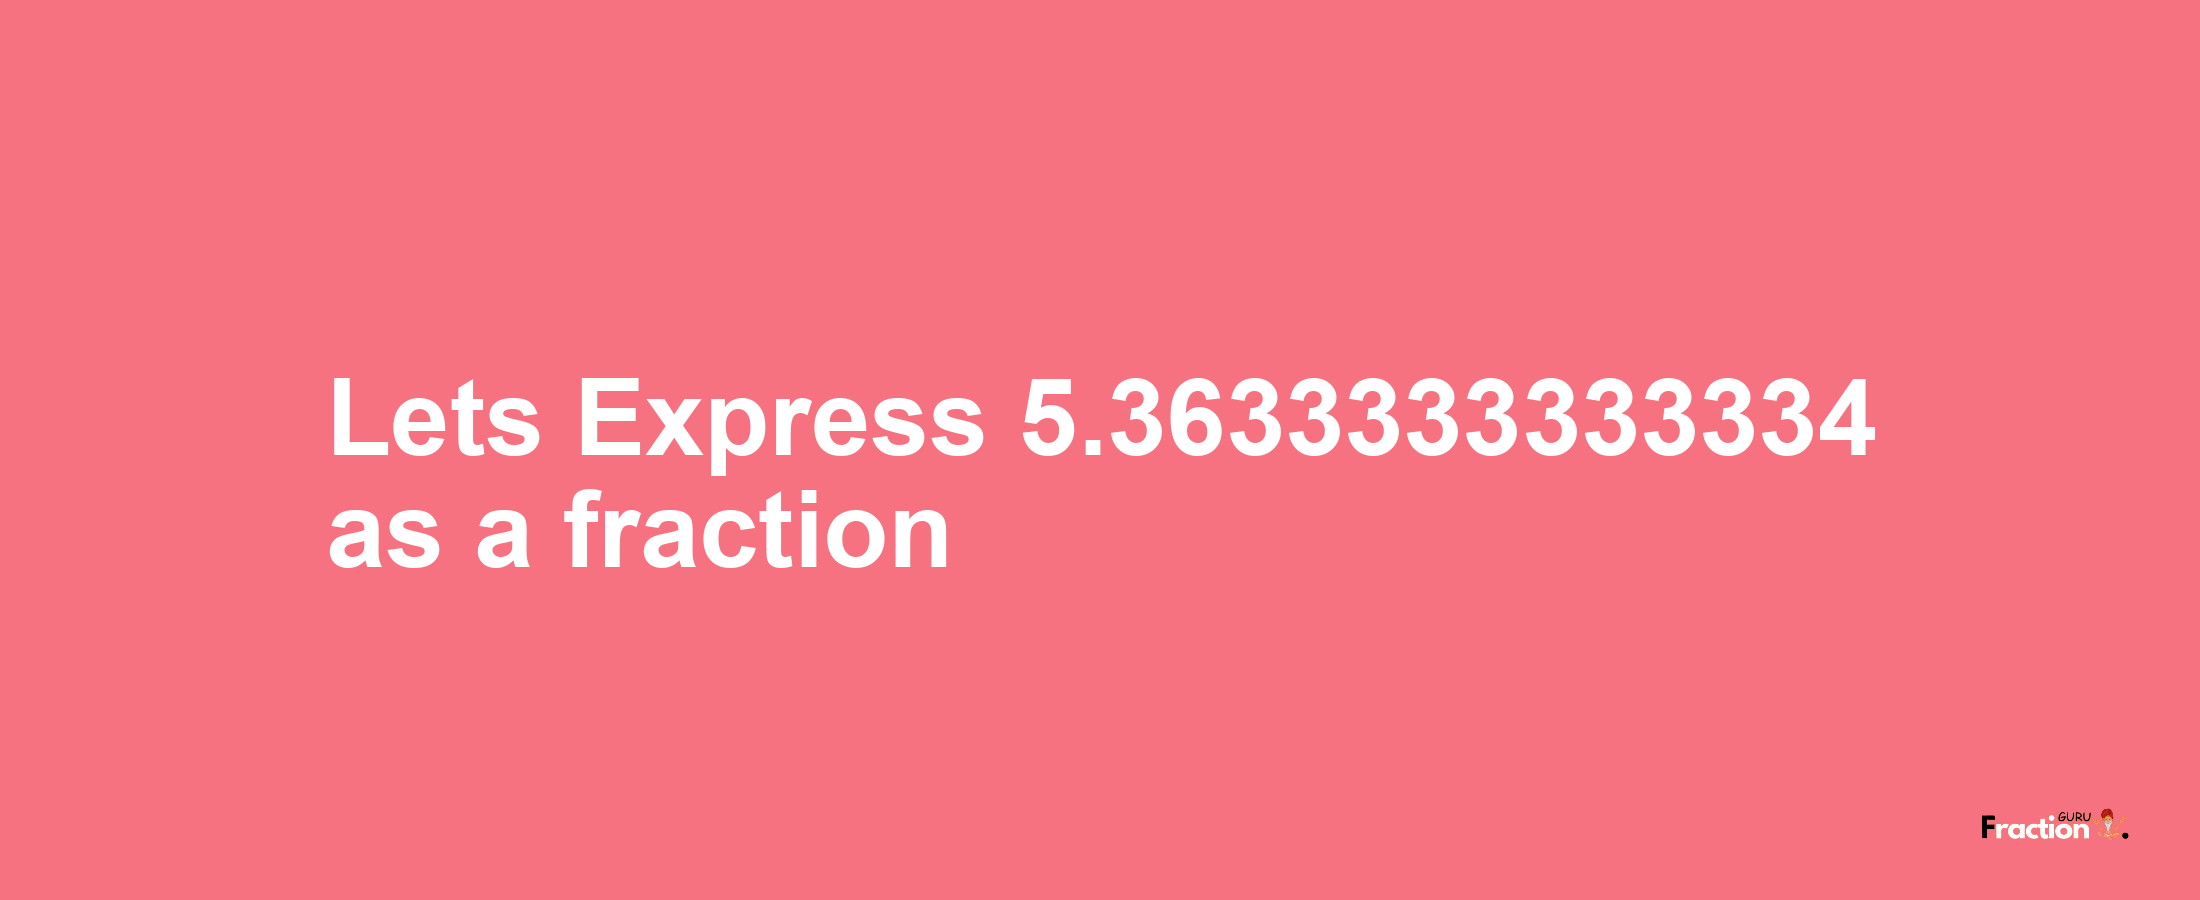 Lets Express 5.3633333333334 as afraction